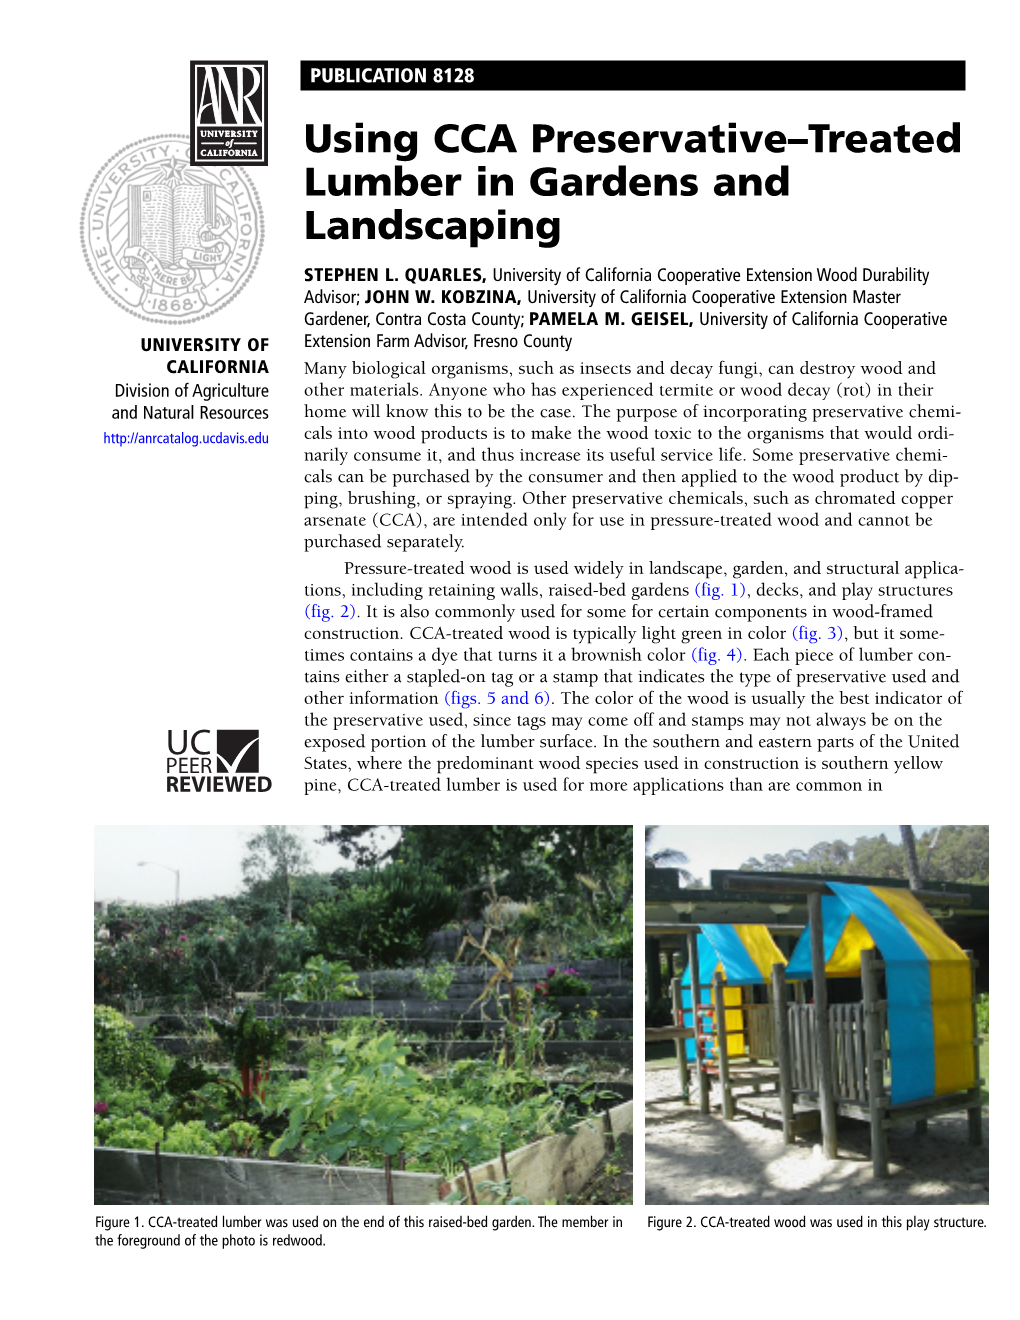 Using CCA Preservative-Treated Lumber in Gardens and Landscaping